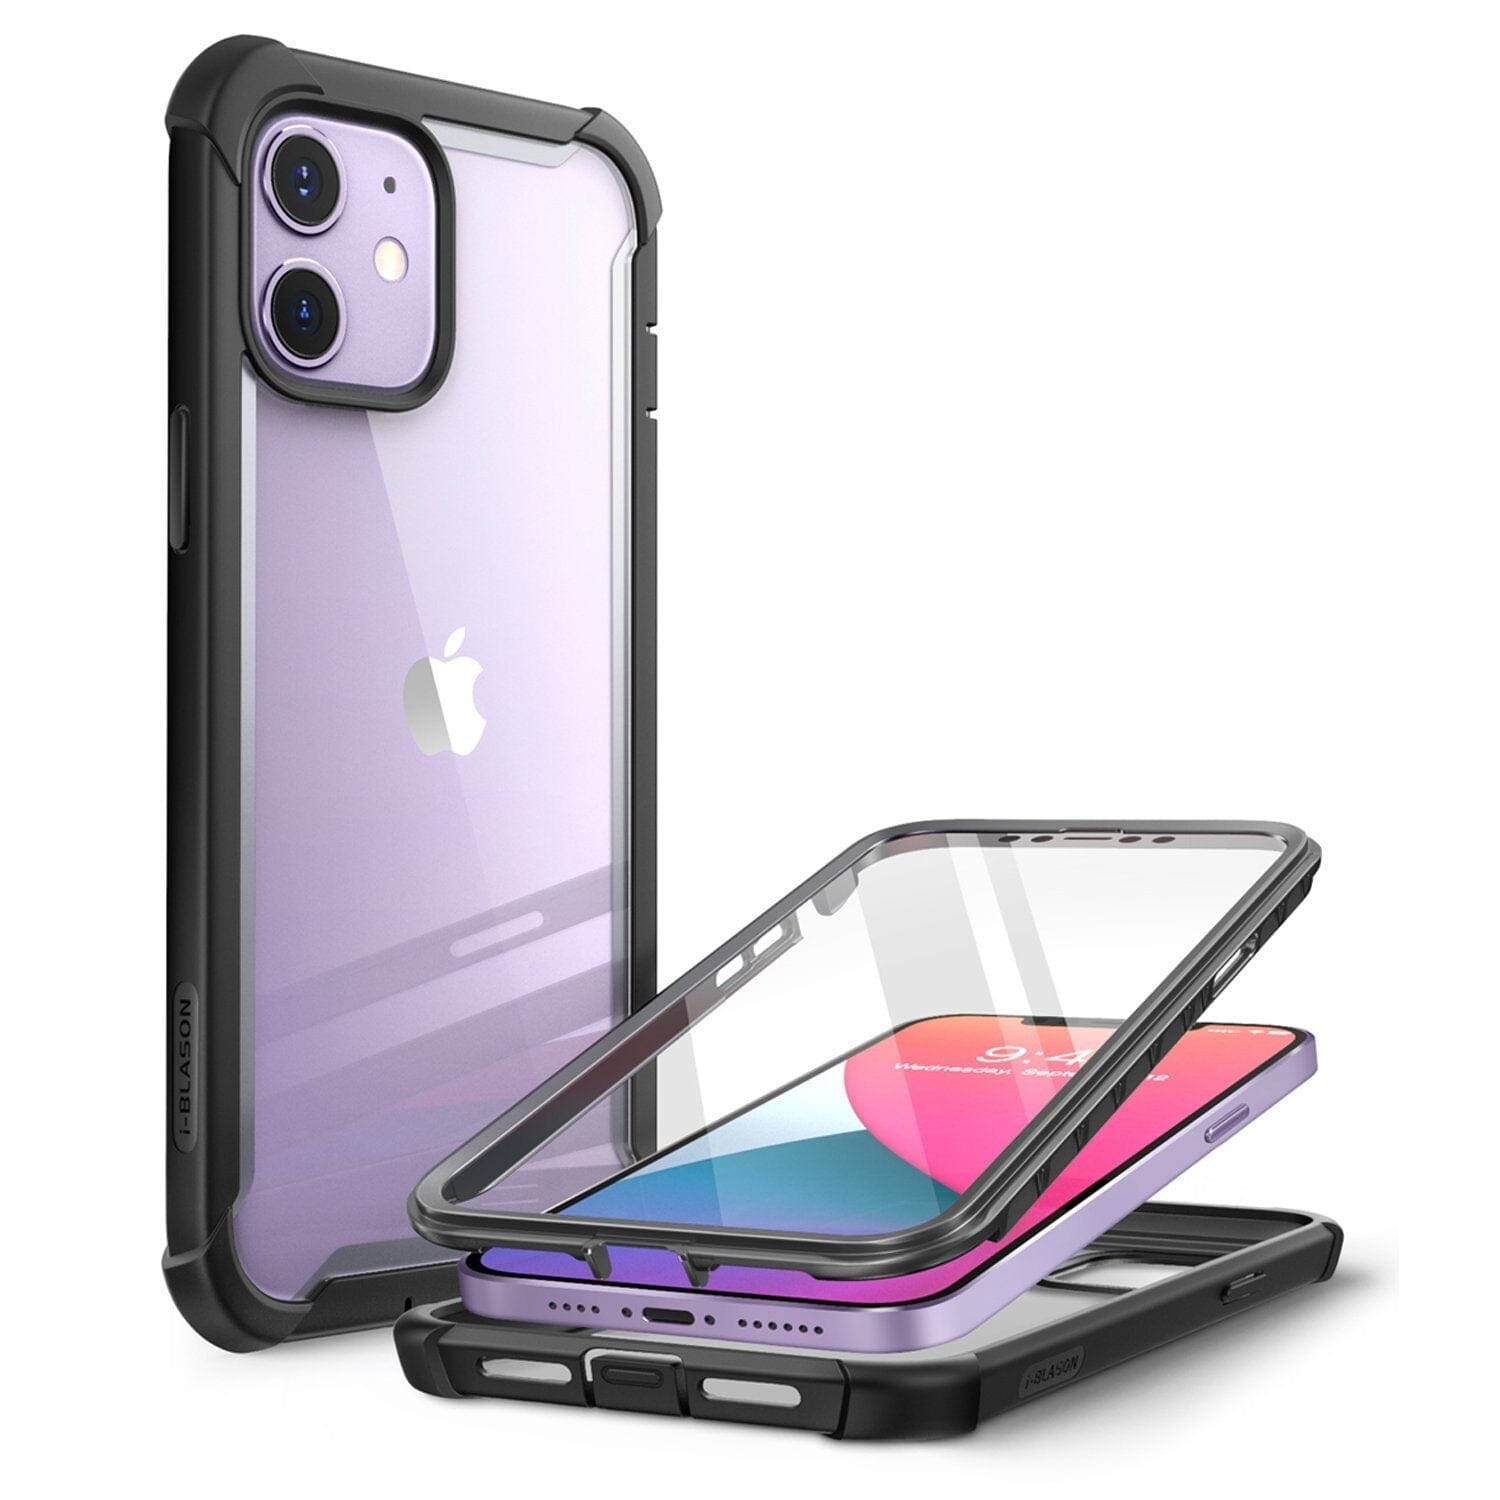 i-Blason Ares Series Rugged Clear Bumper Case for iPhone 12 Series (With Build-in Screen Protector) iPhone 12 Series i-Blason 